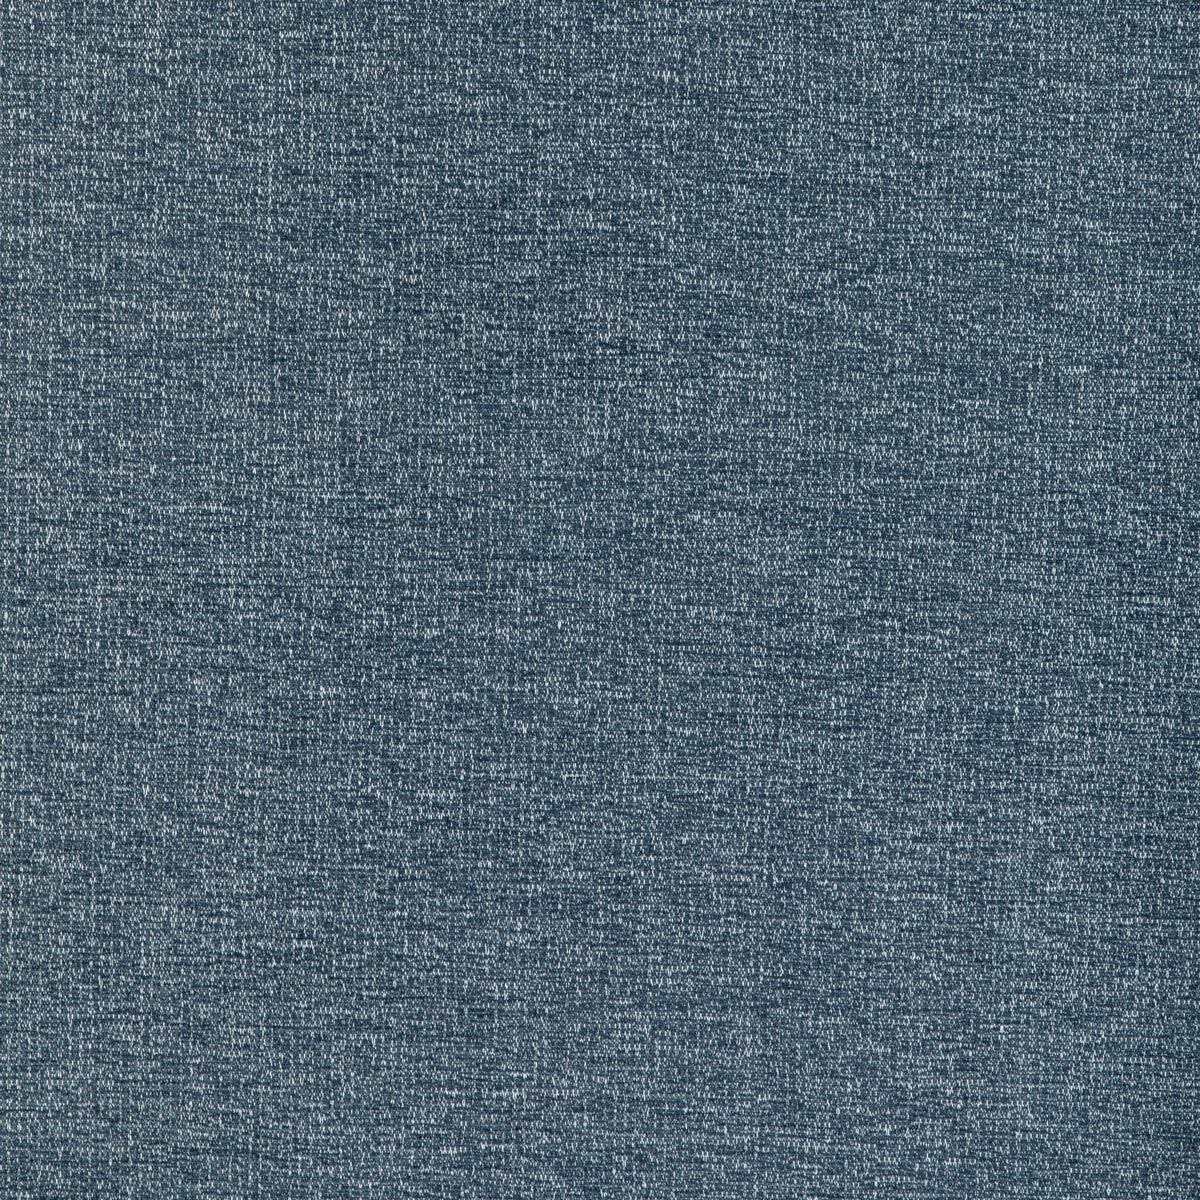 Corbett fabric in marine color - pattern 37060.50.0 - by Kravet Design in the Thom Filicia Latitude collection